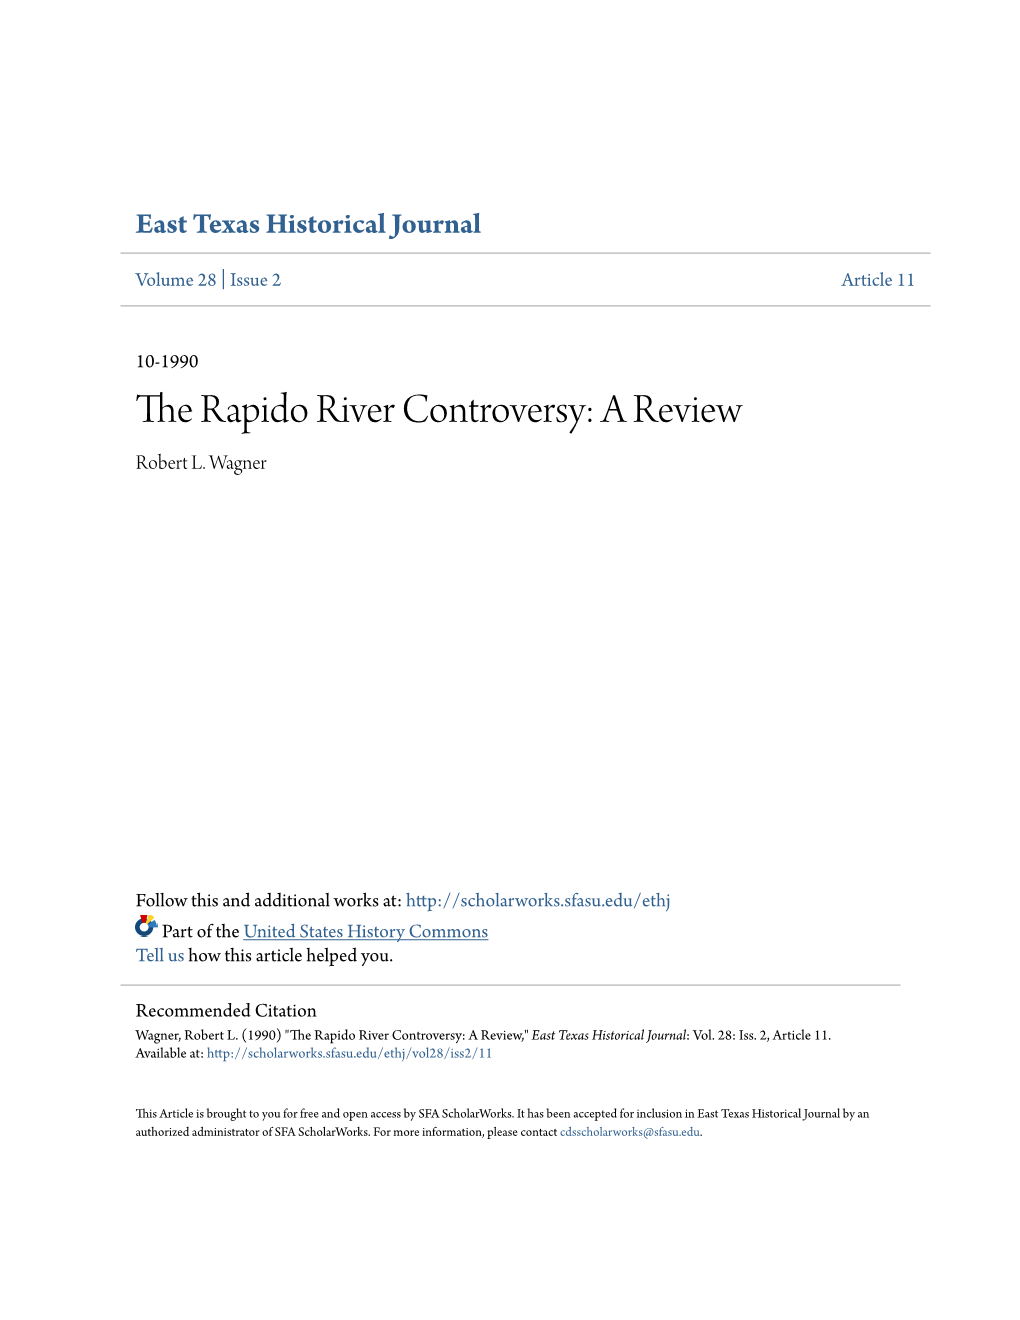 The Rapido River Controversy: a Review Robert L